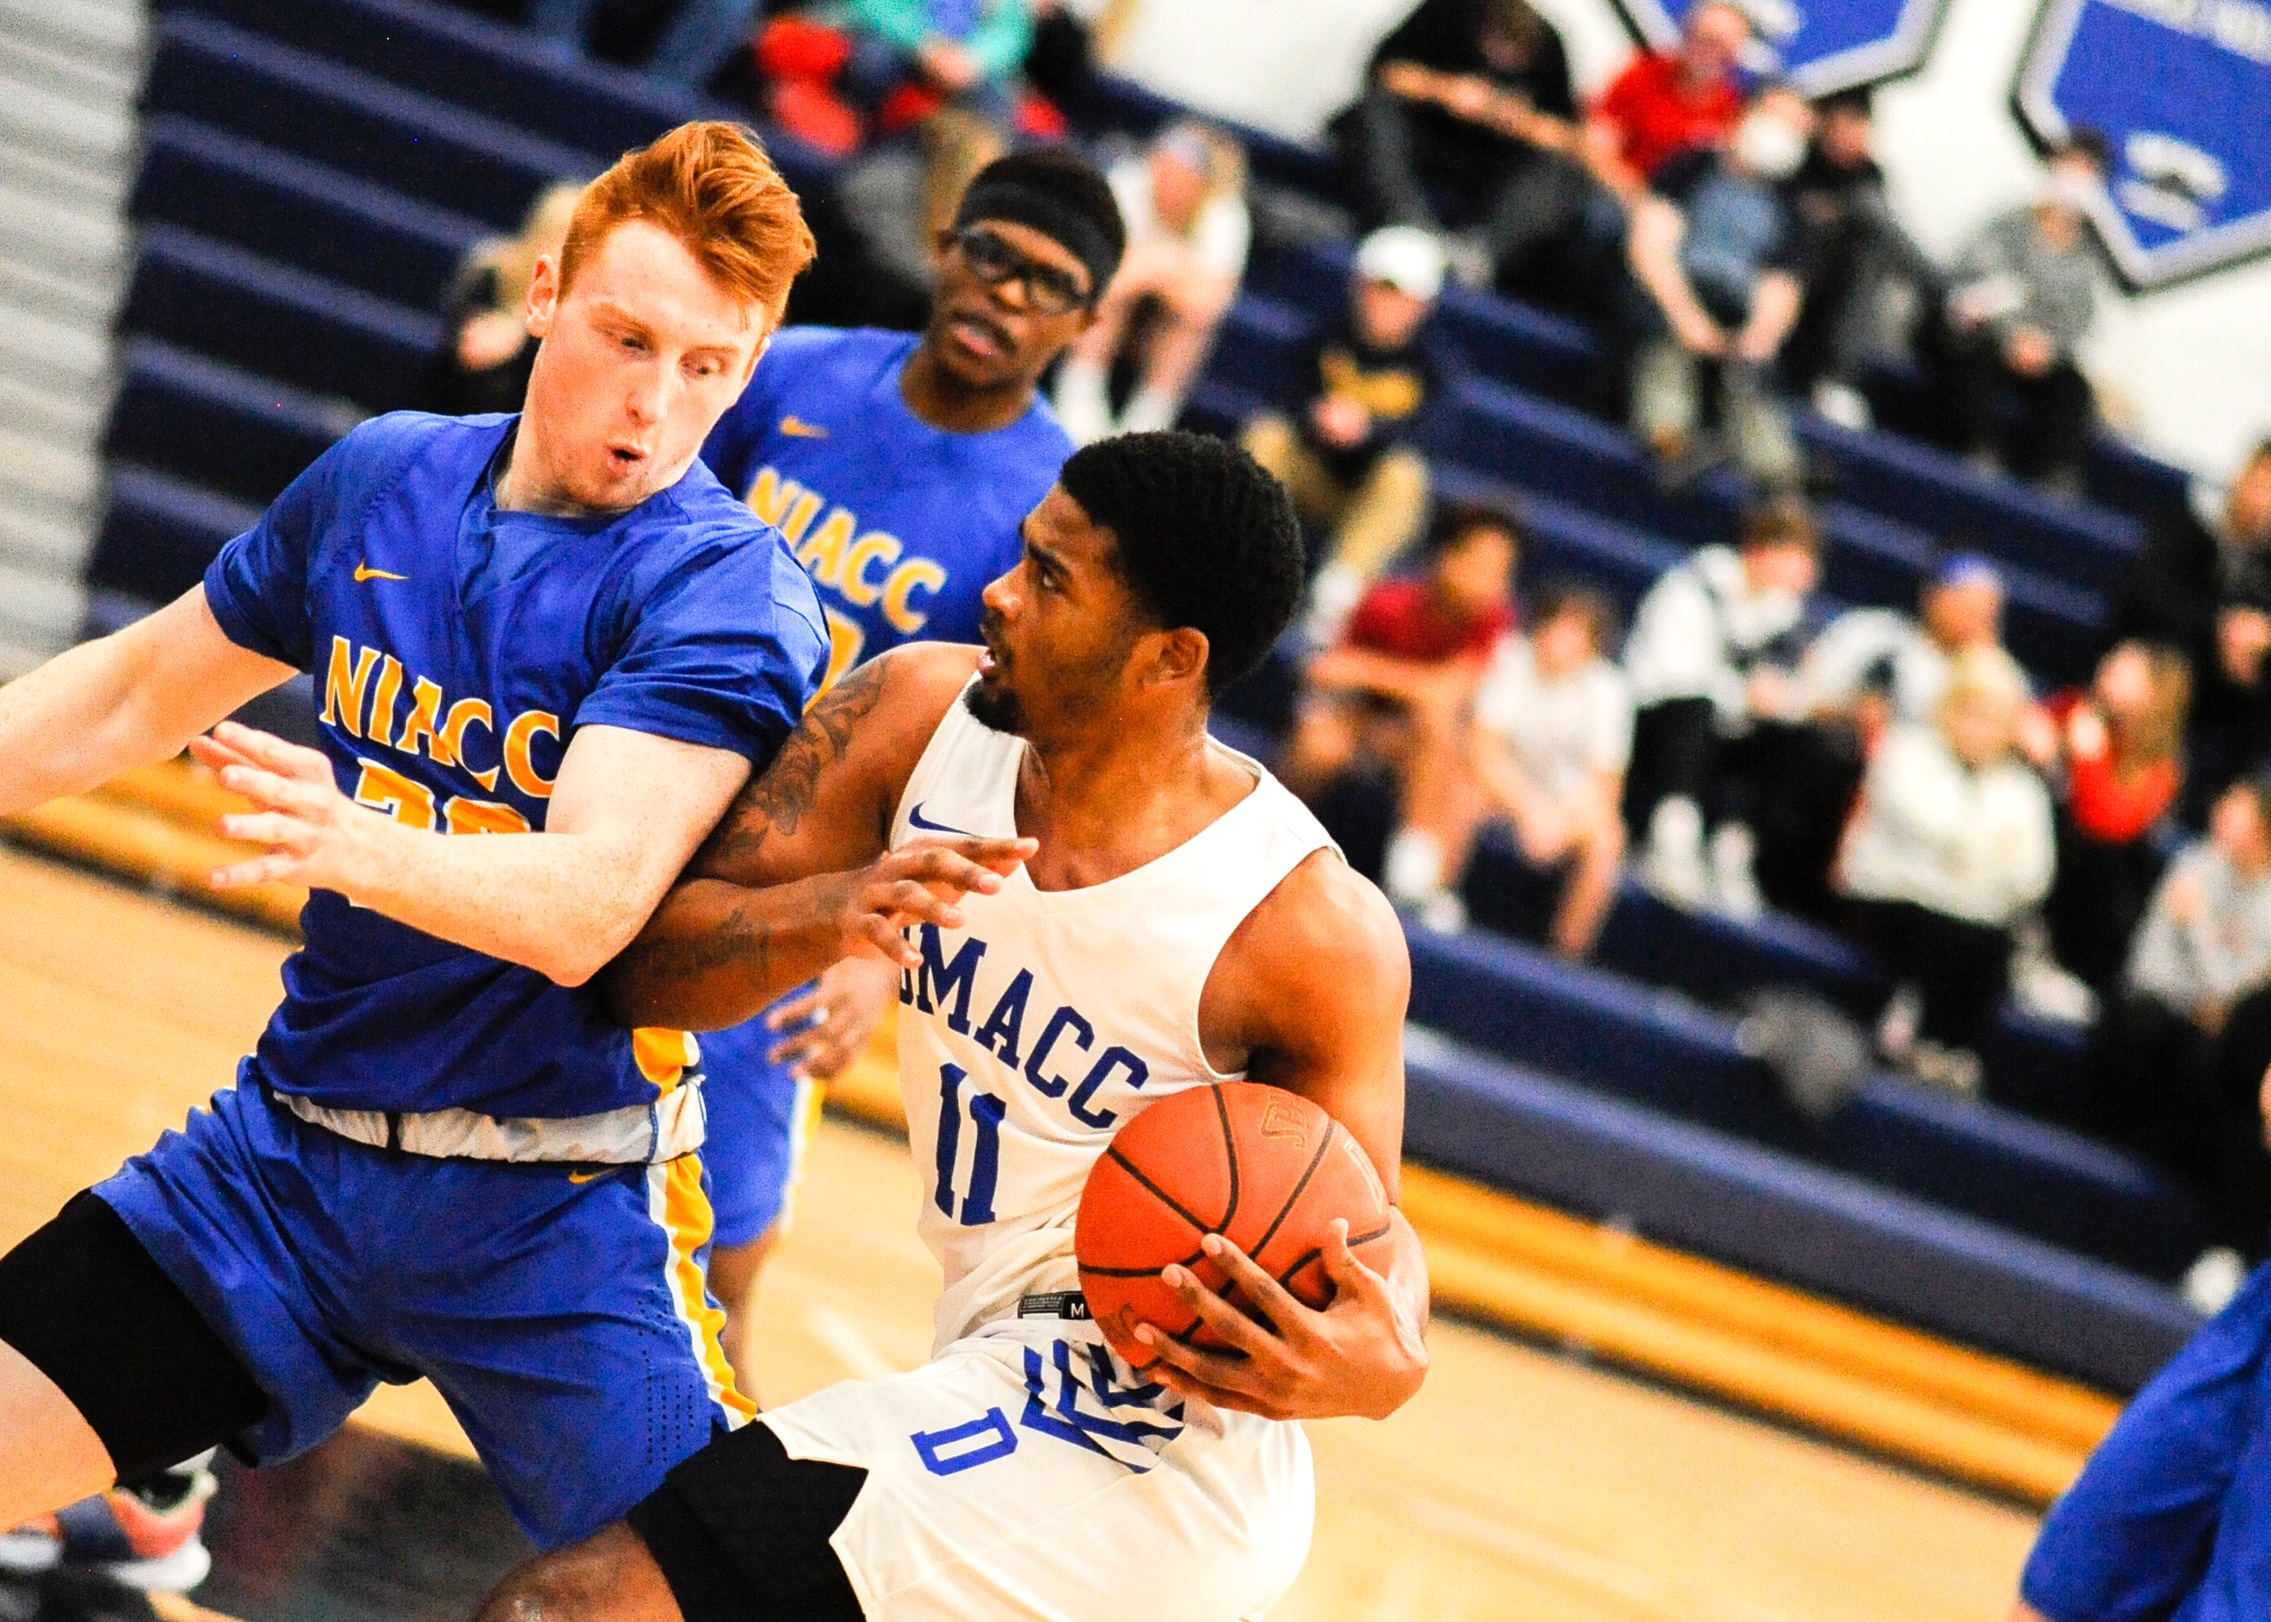 DMACC men's basketball team picks up two wins in Southeastern Classic